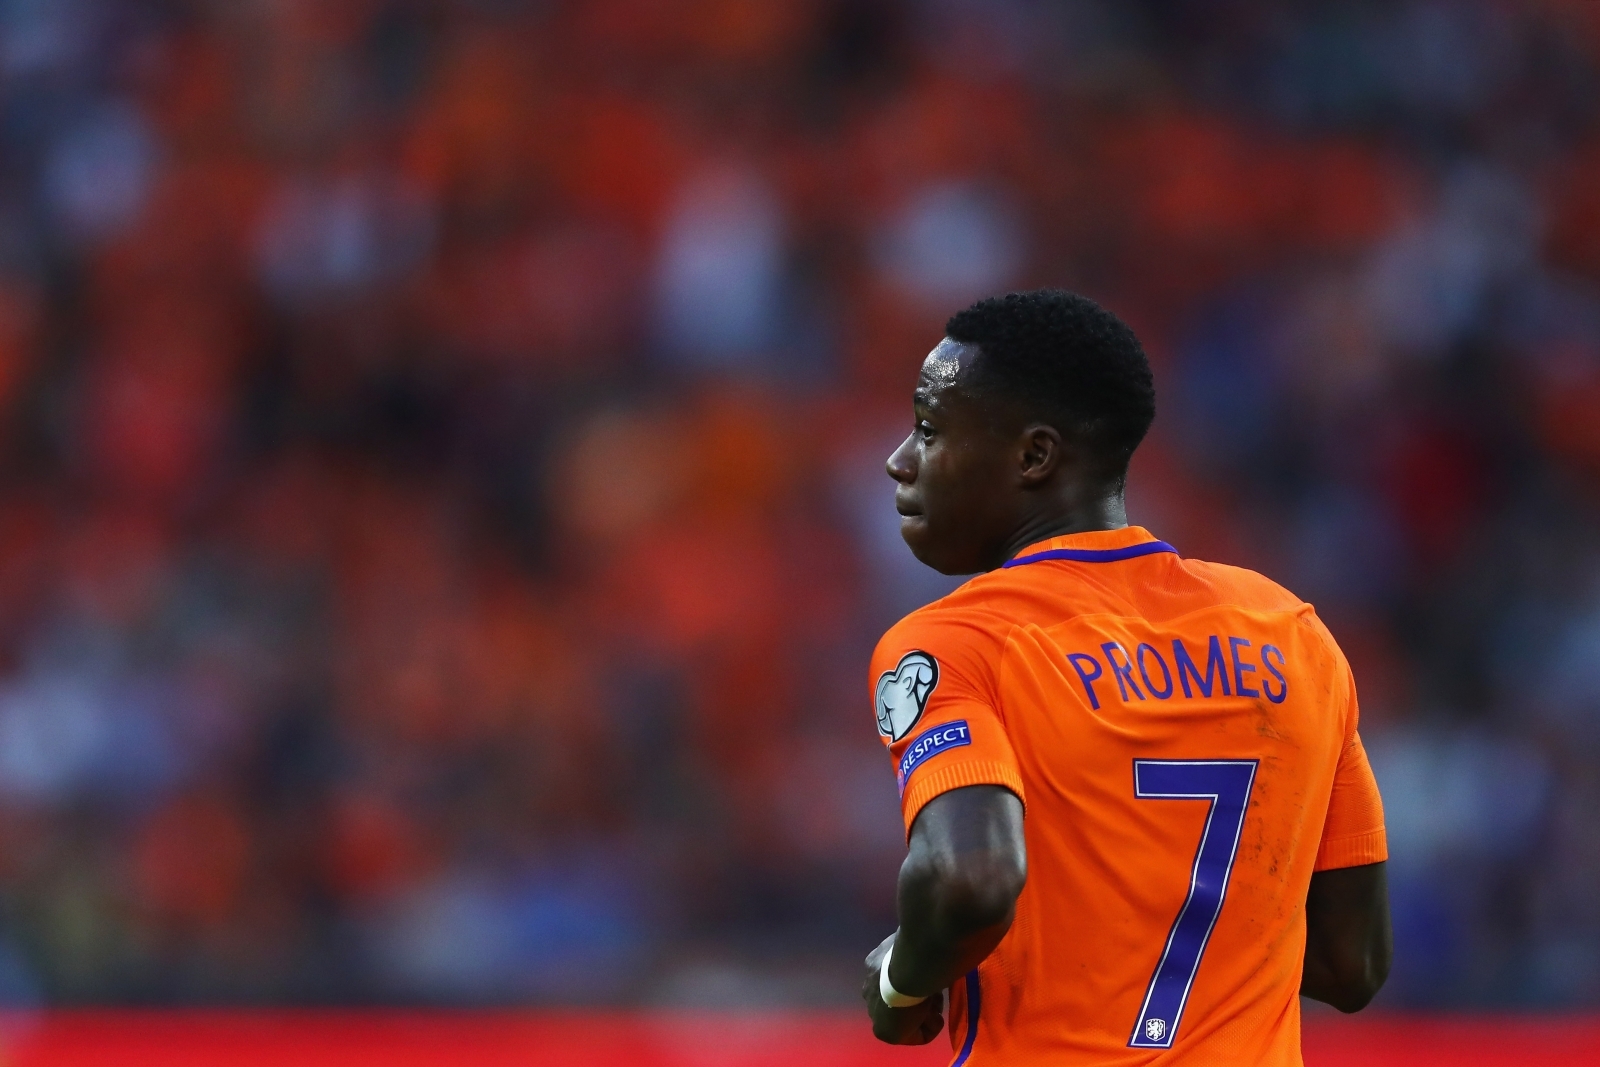 quincy promes summer transfer rumours